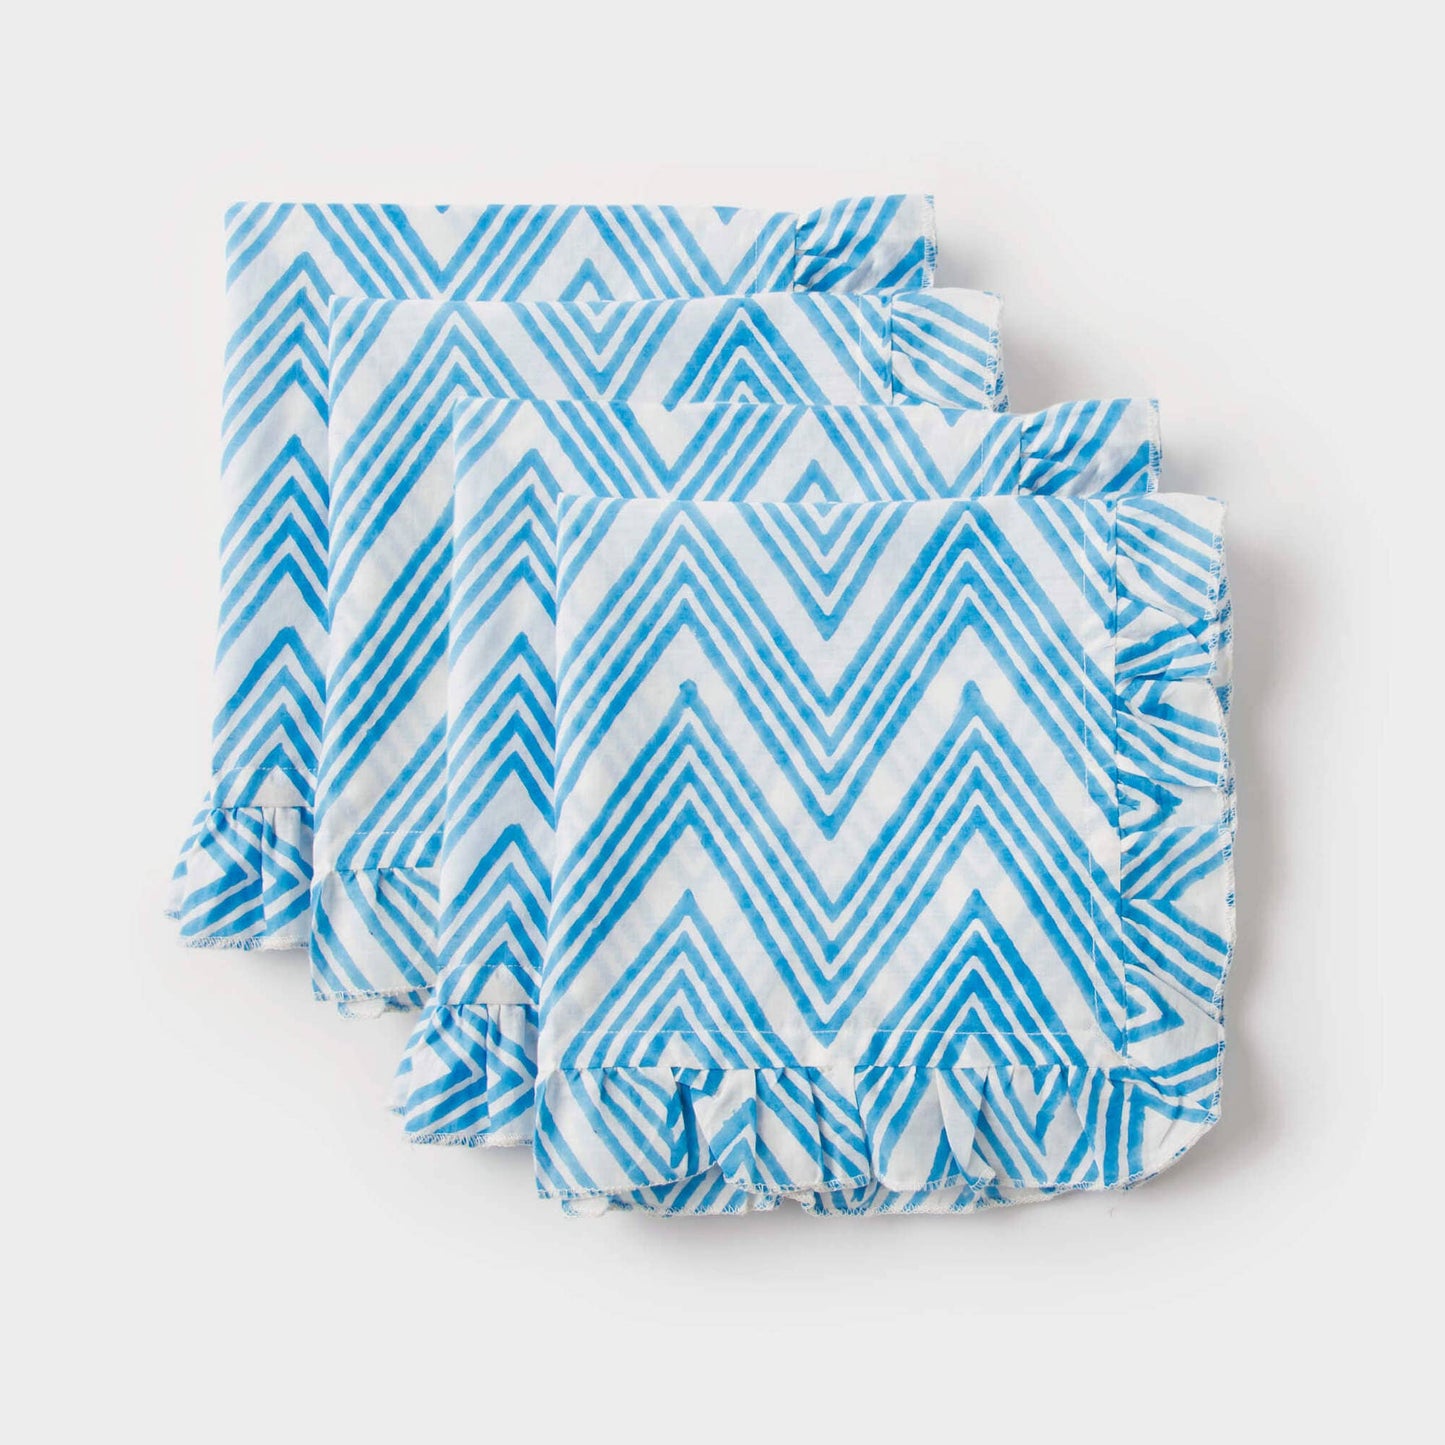 Blue ZigZag Ruffled Napkins - Set of 4 - Curated Home Decor